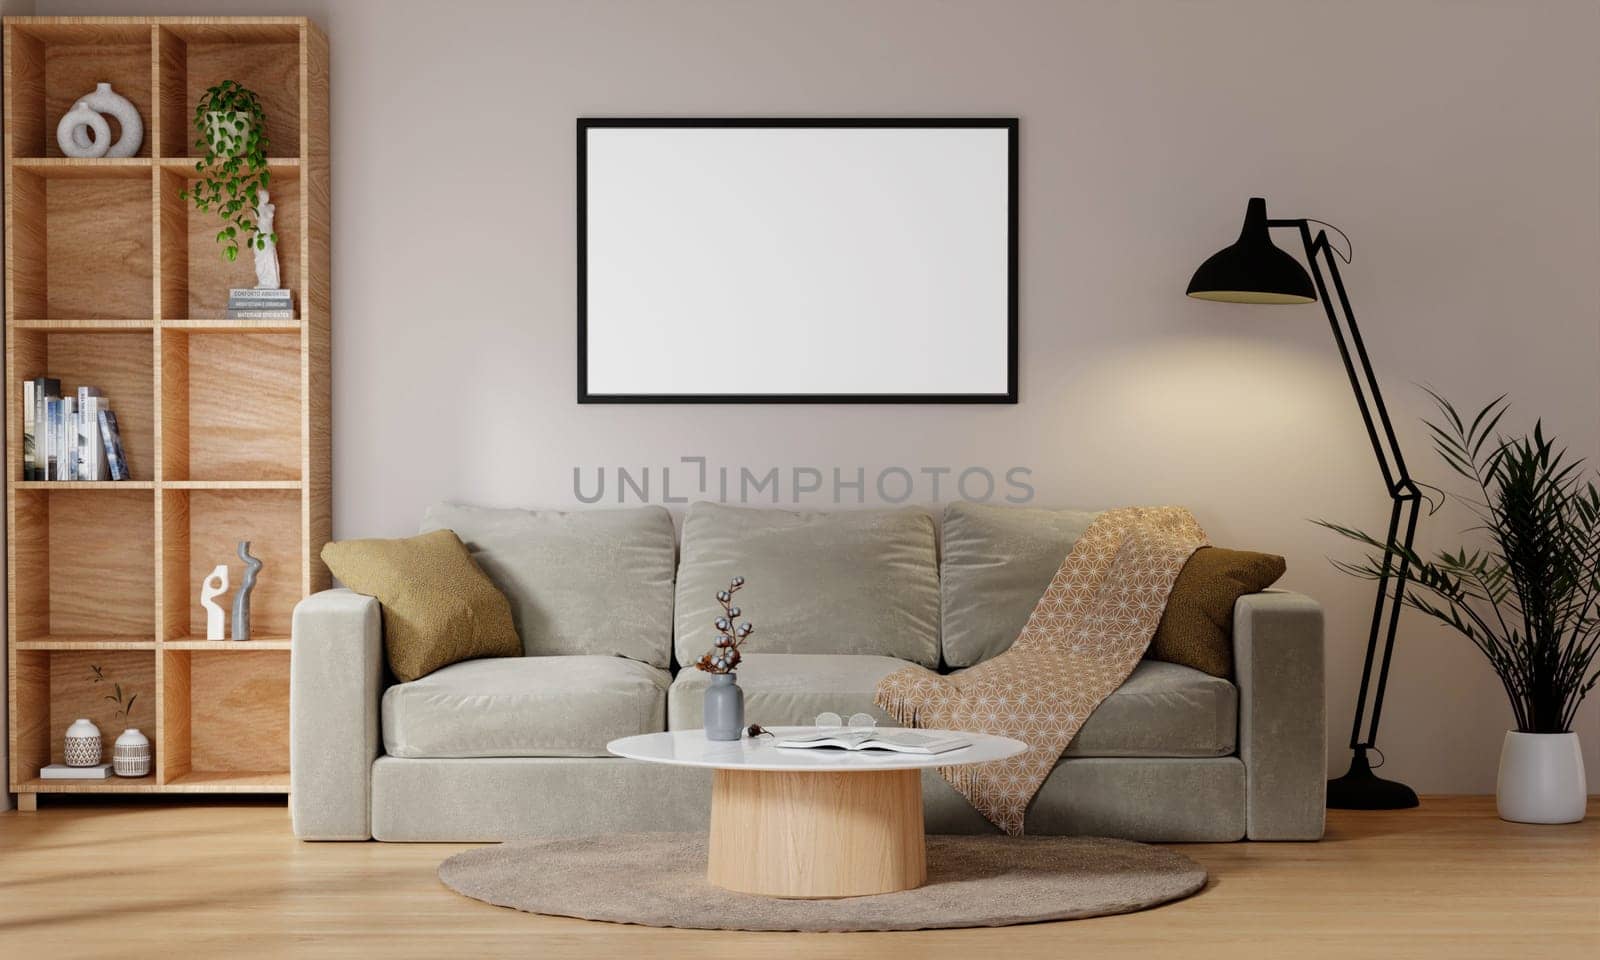 Minimal interior design of modern living room with beige fabric sofa and cushions. White wall with frame mockup space. 3d render illustration by meepiangraphic